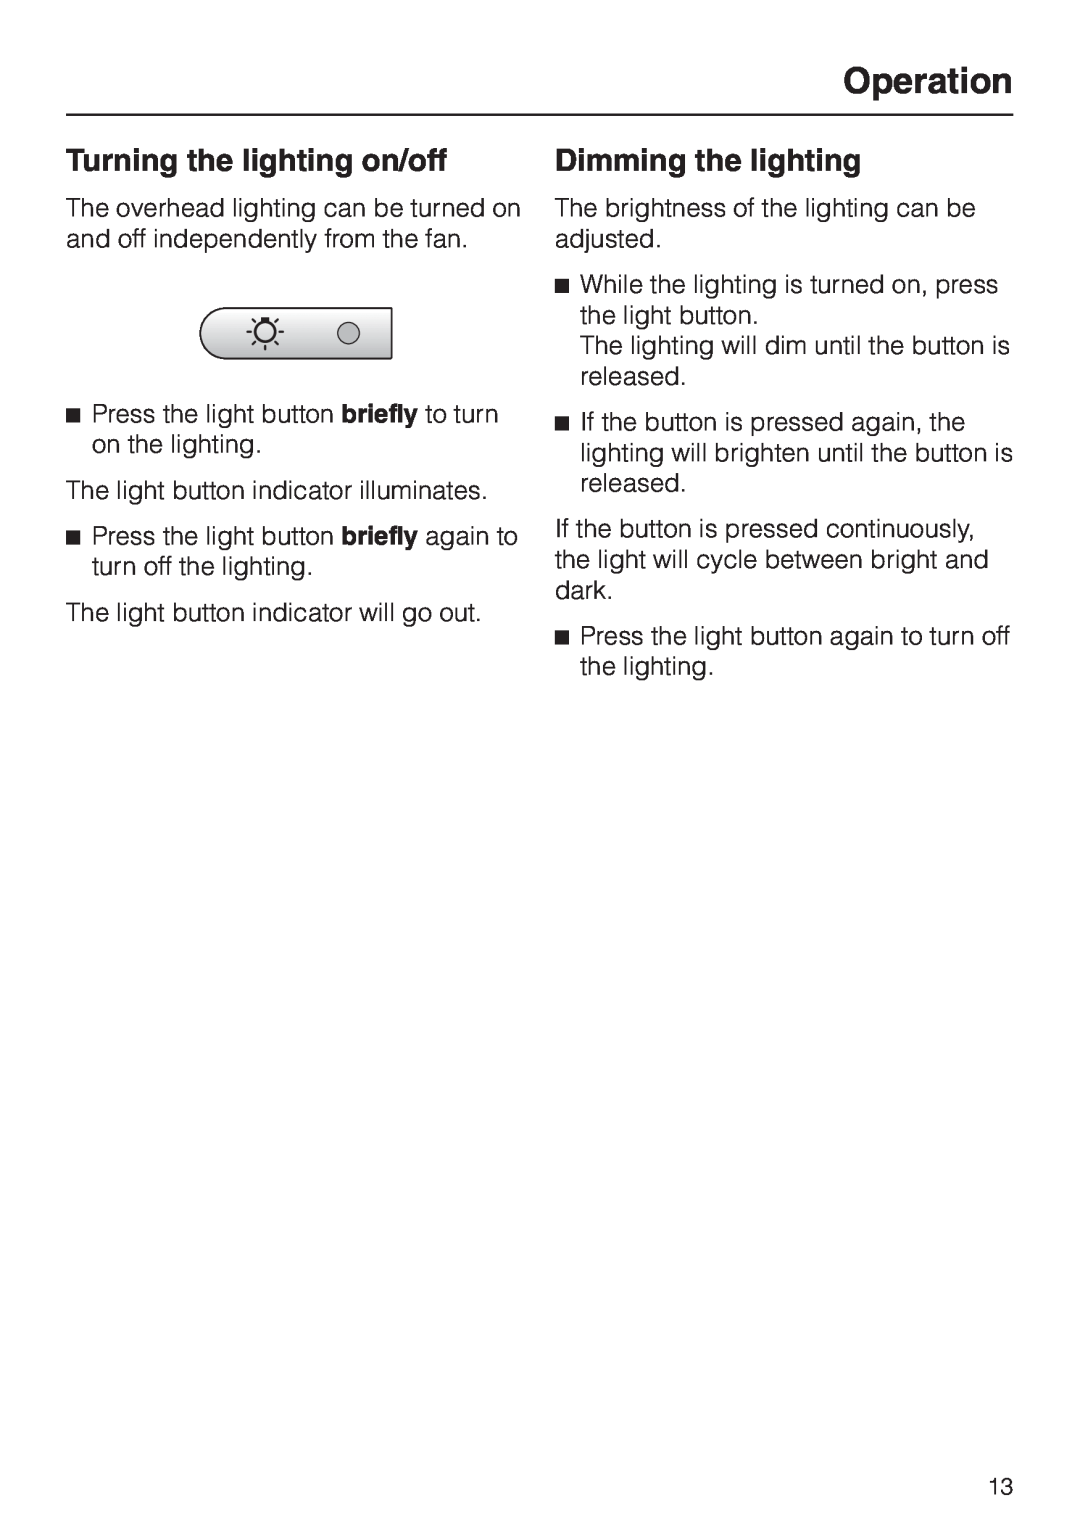 Miele DA 402 installation instructions Turning the lighting on/off, Dimming the lighting, Operation 